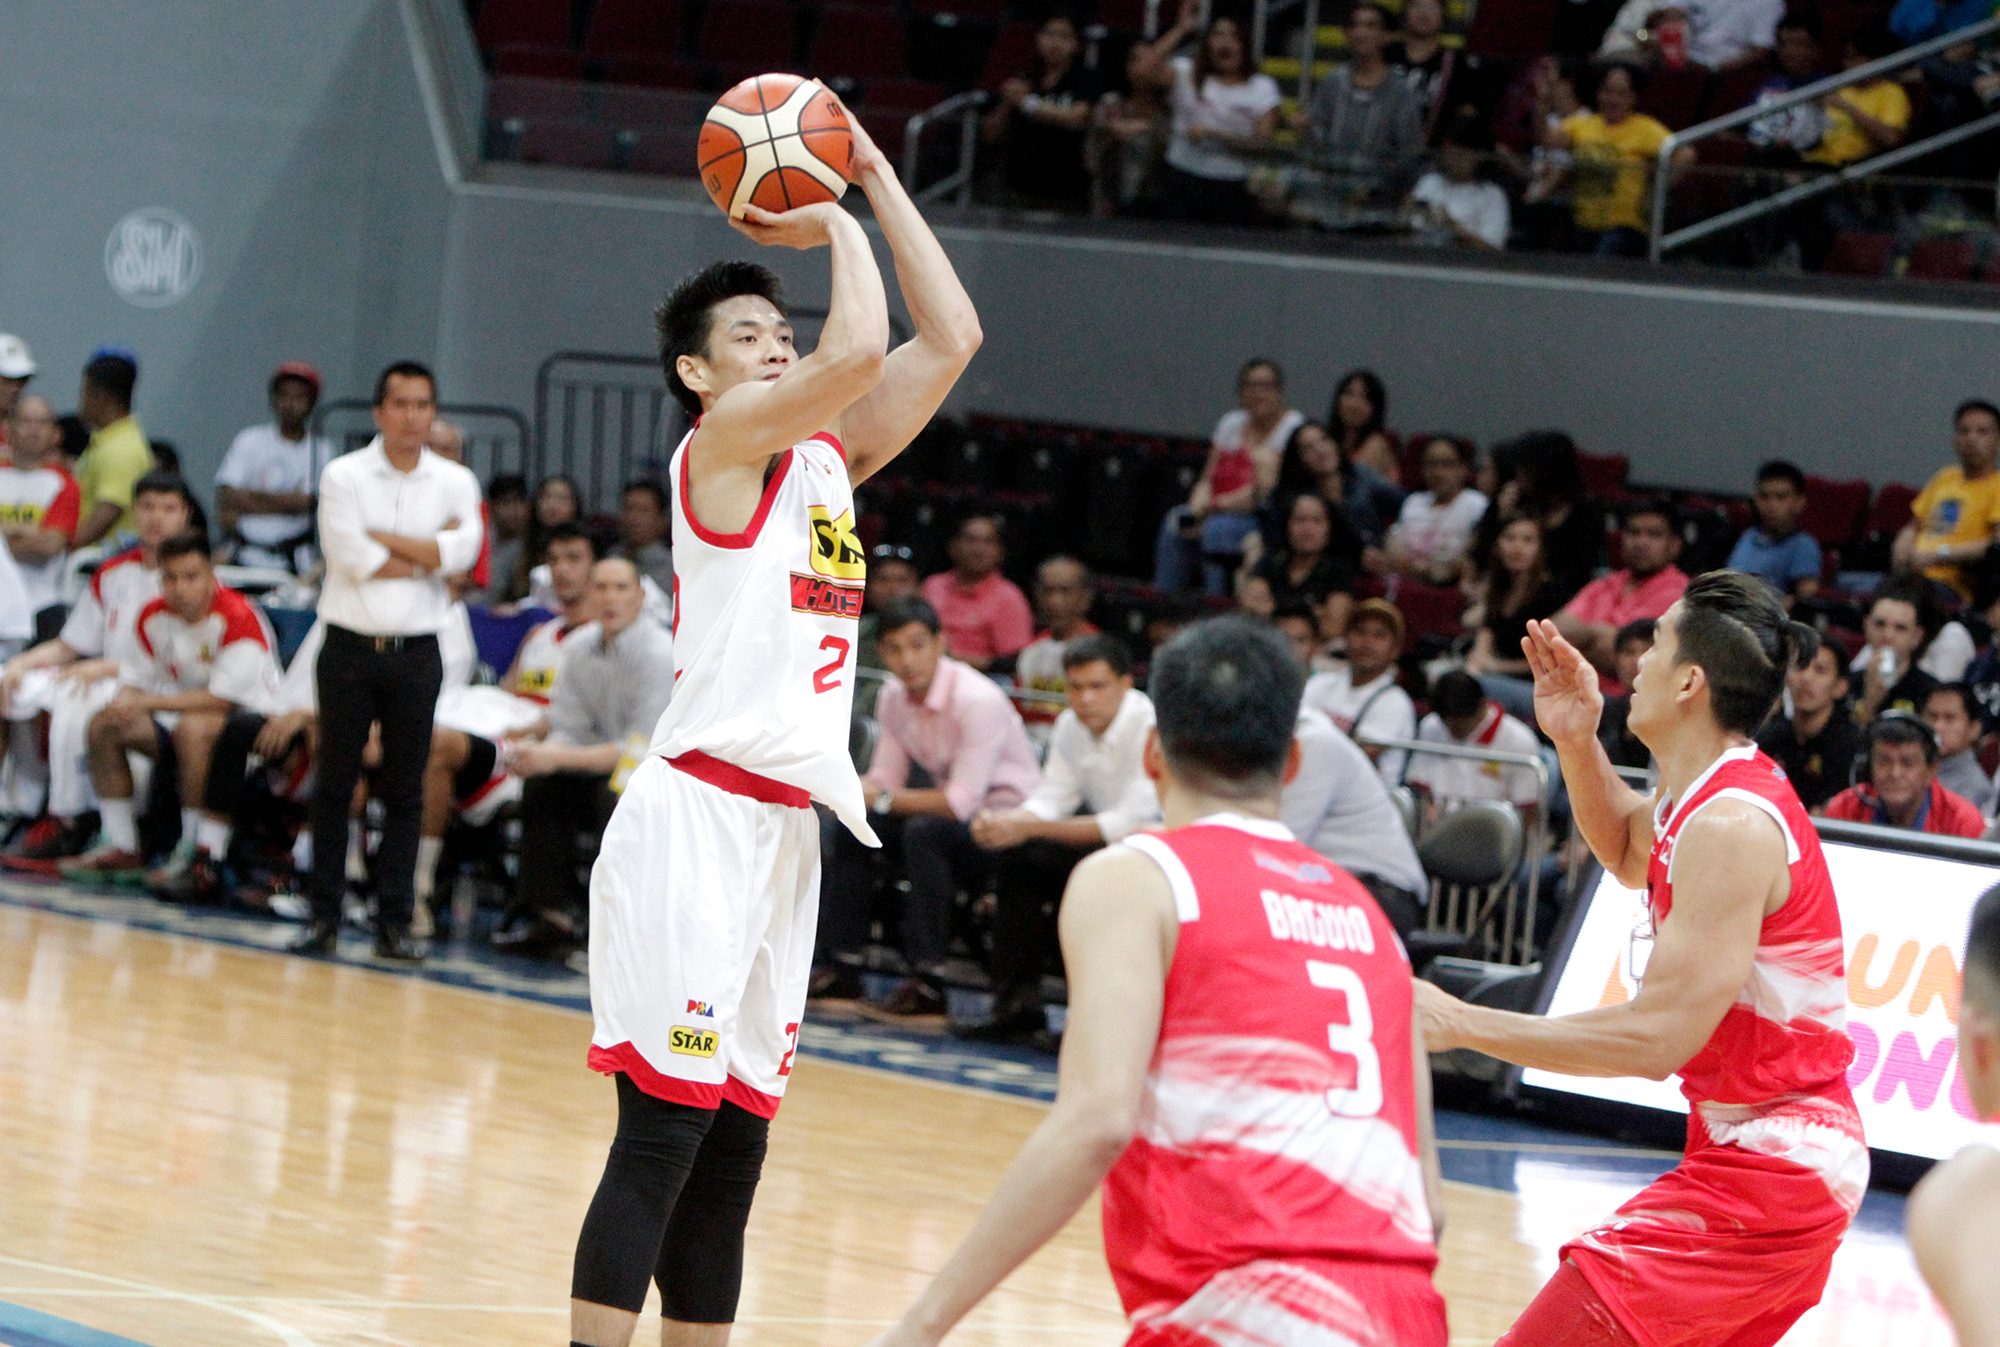 Allein Maliksi benefiting from Star’s new arrivals